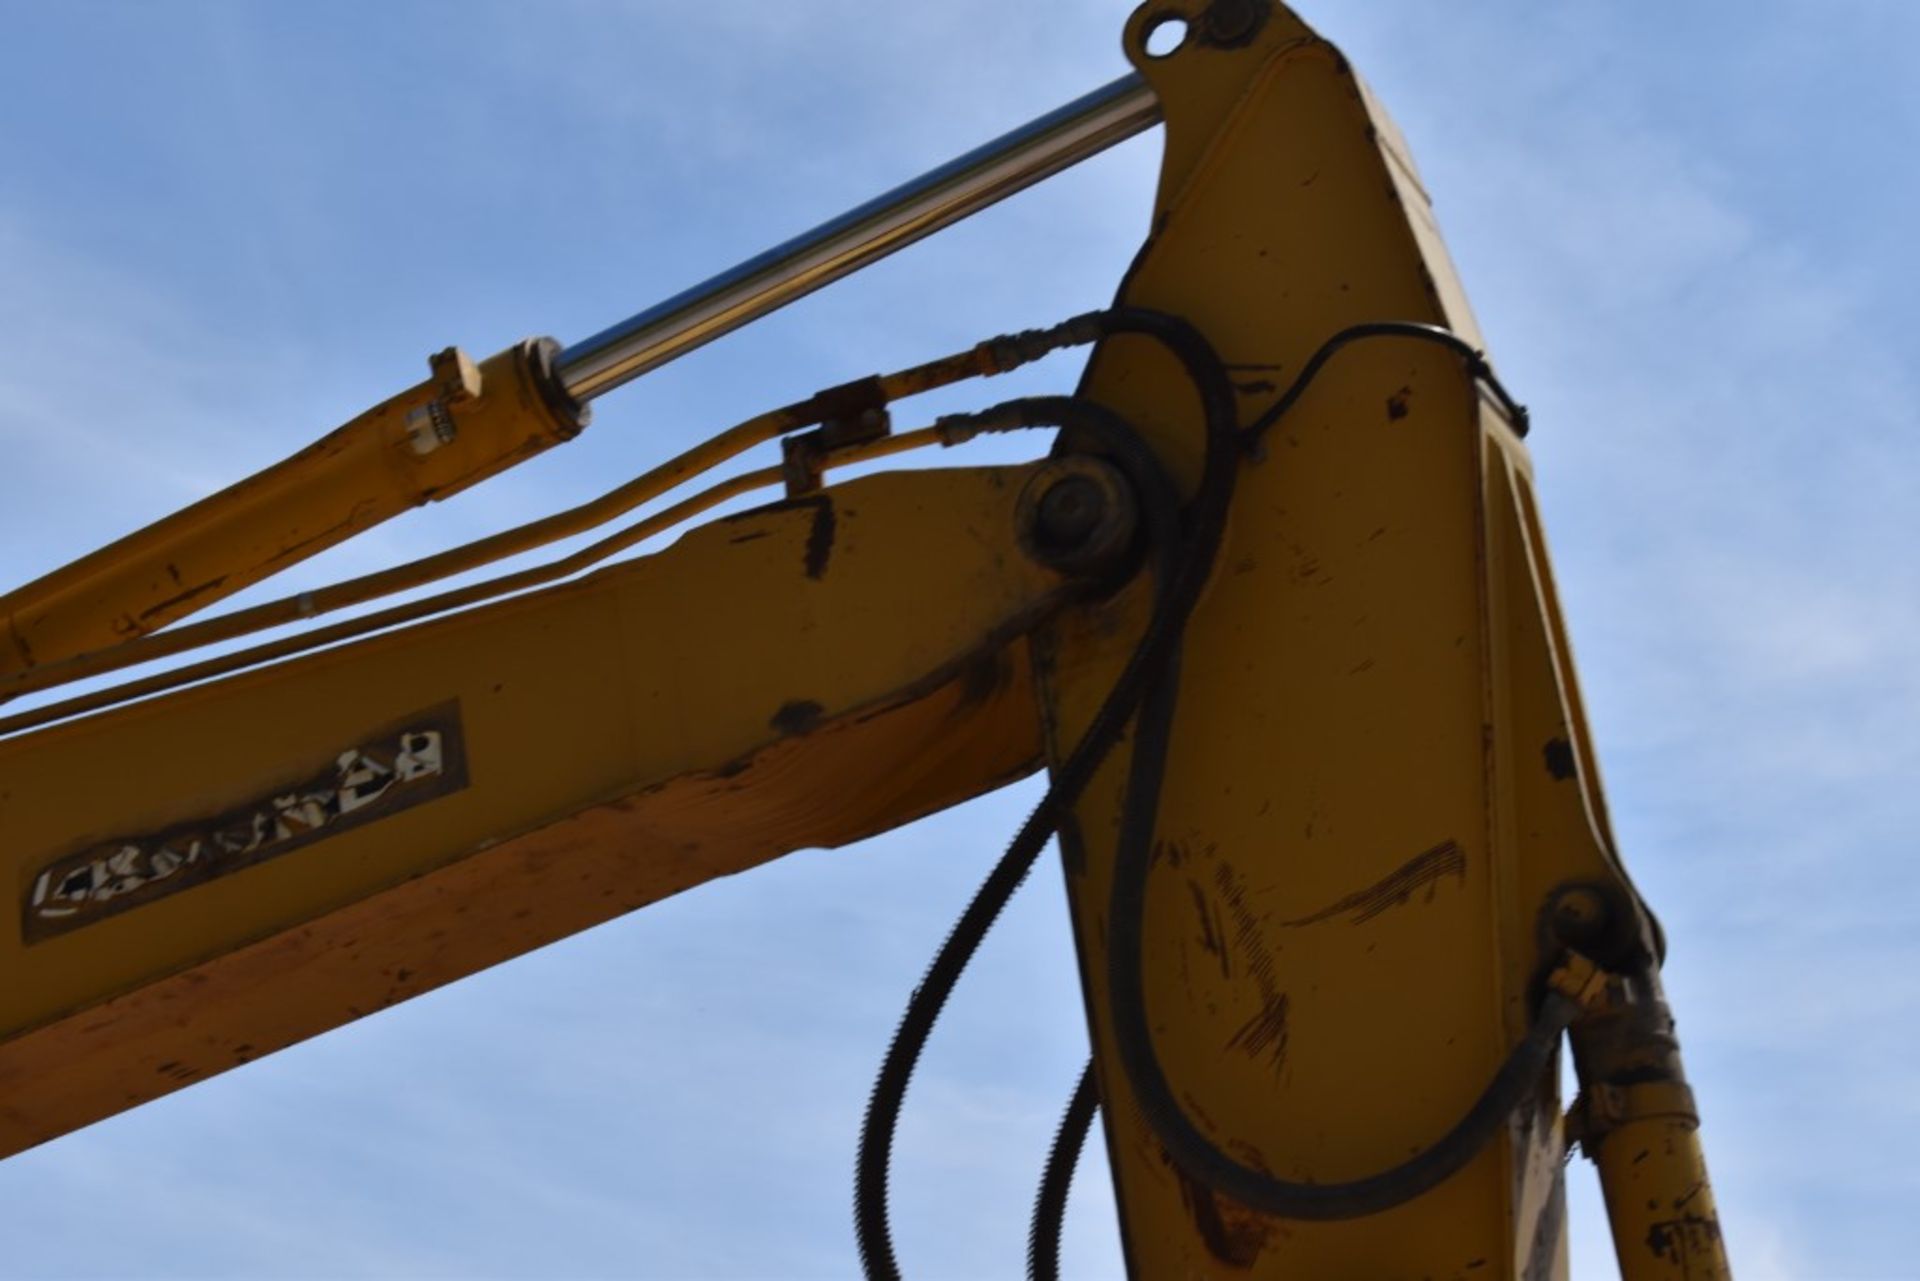 CAT 311 Excavator 21370 Hours, Runs and Operates, WR 48" Hydraulic Swivel Bucket, Auxiliary - Image 11 of 42